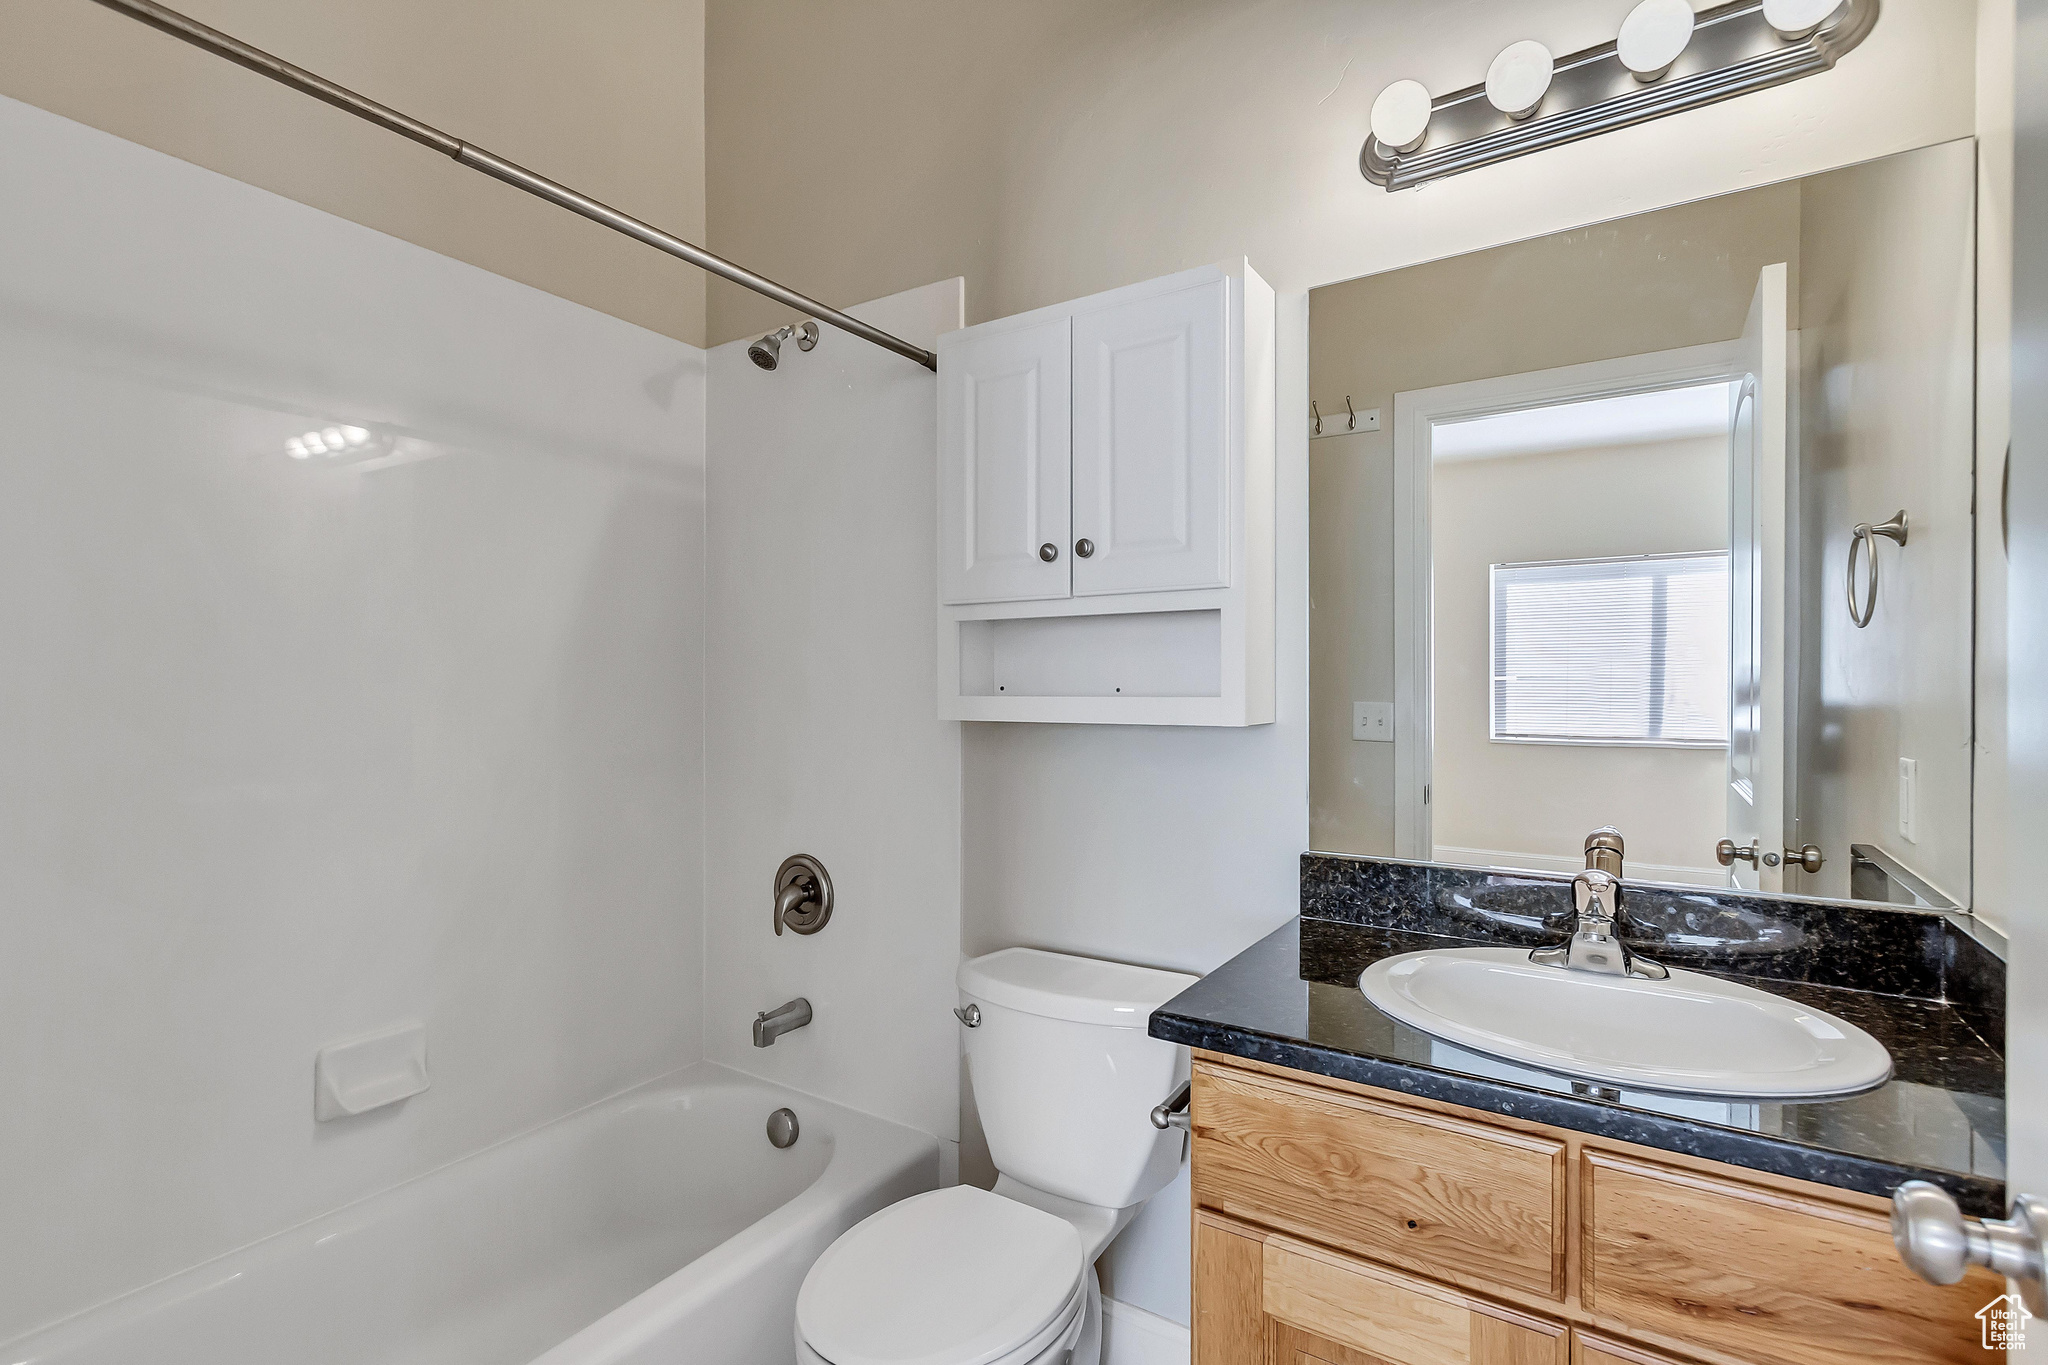 Full bathroom featuring vanity, toilet, and shower / washtub combination